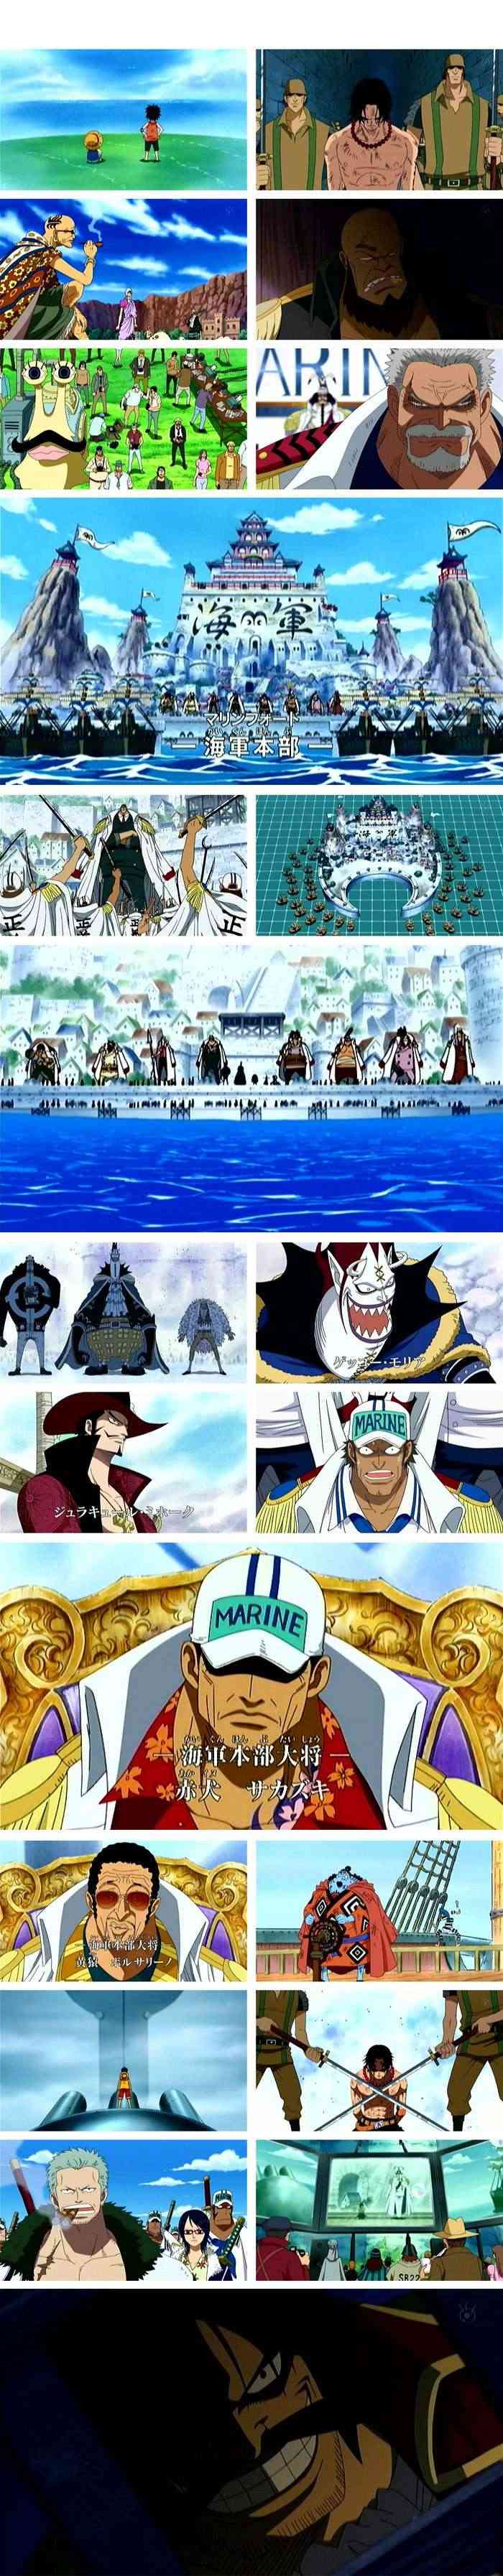 one piece annime - Page 3 Op-45911